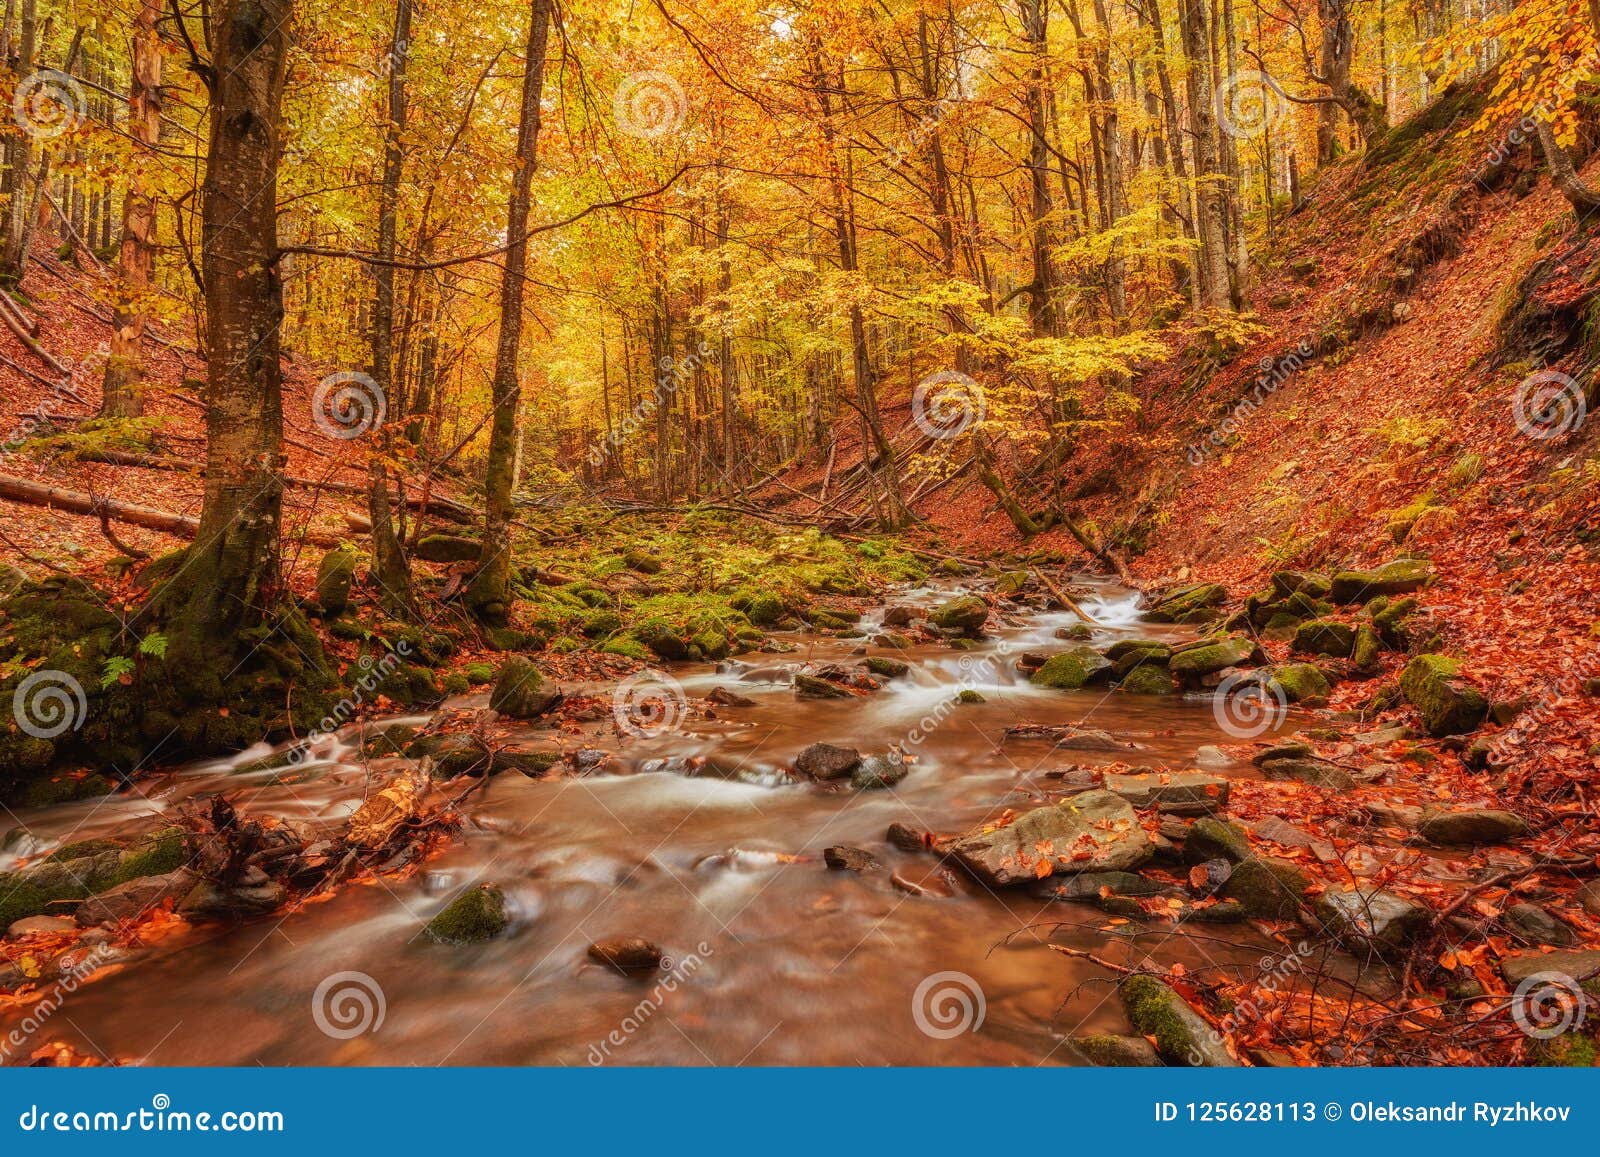 Rapid Mountain River In Autumn Stock Image Image Of Environment